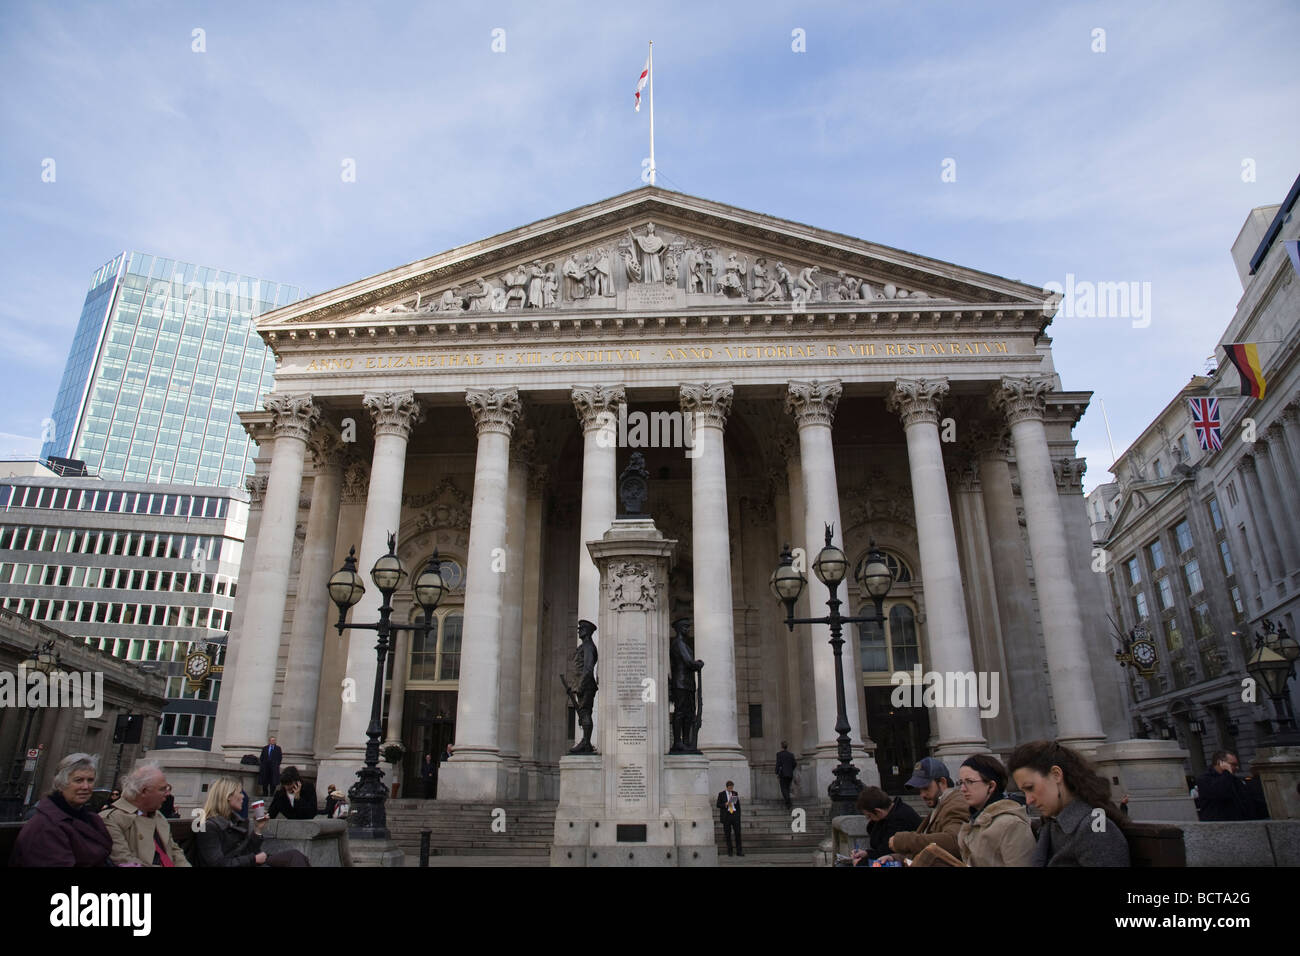 Front entrance to the Royal Exchange in the City of London, England. Stock Photo